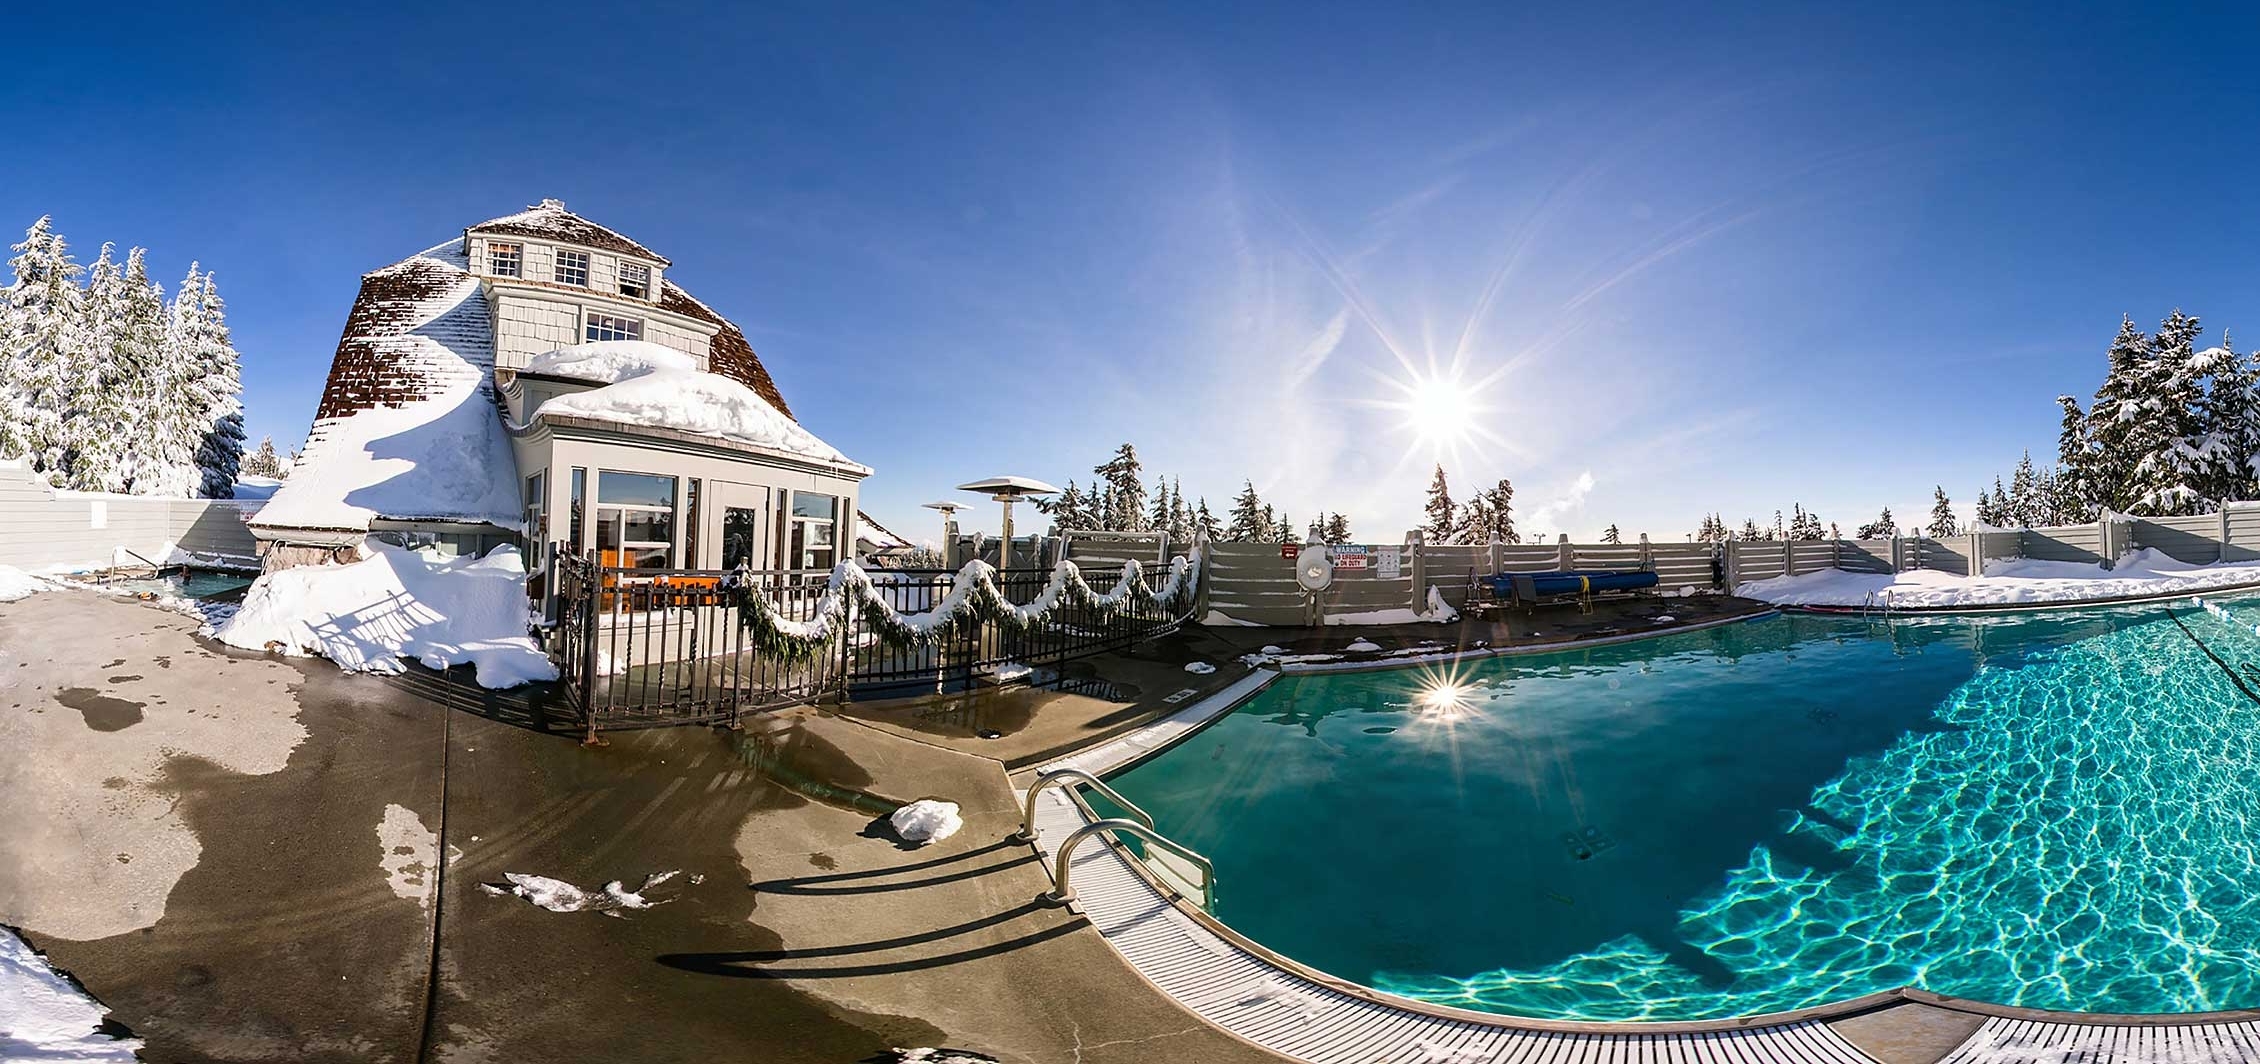 TIMBERLINE POOL PHOTO FROM 2014